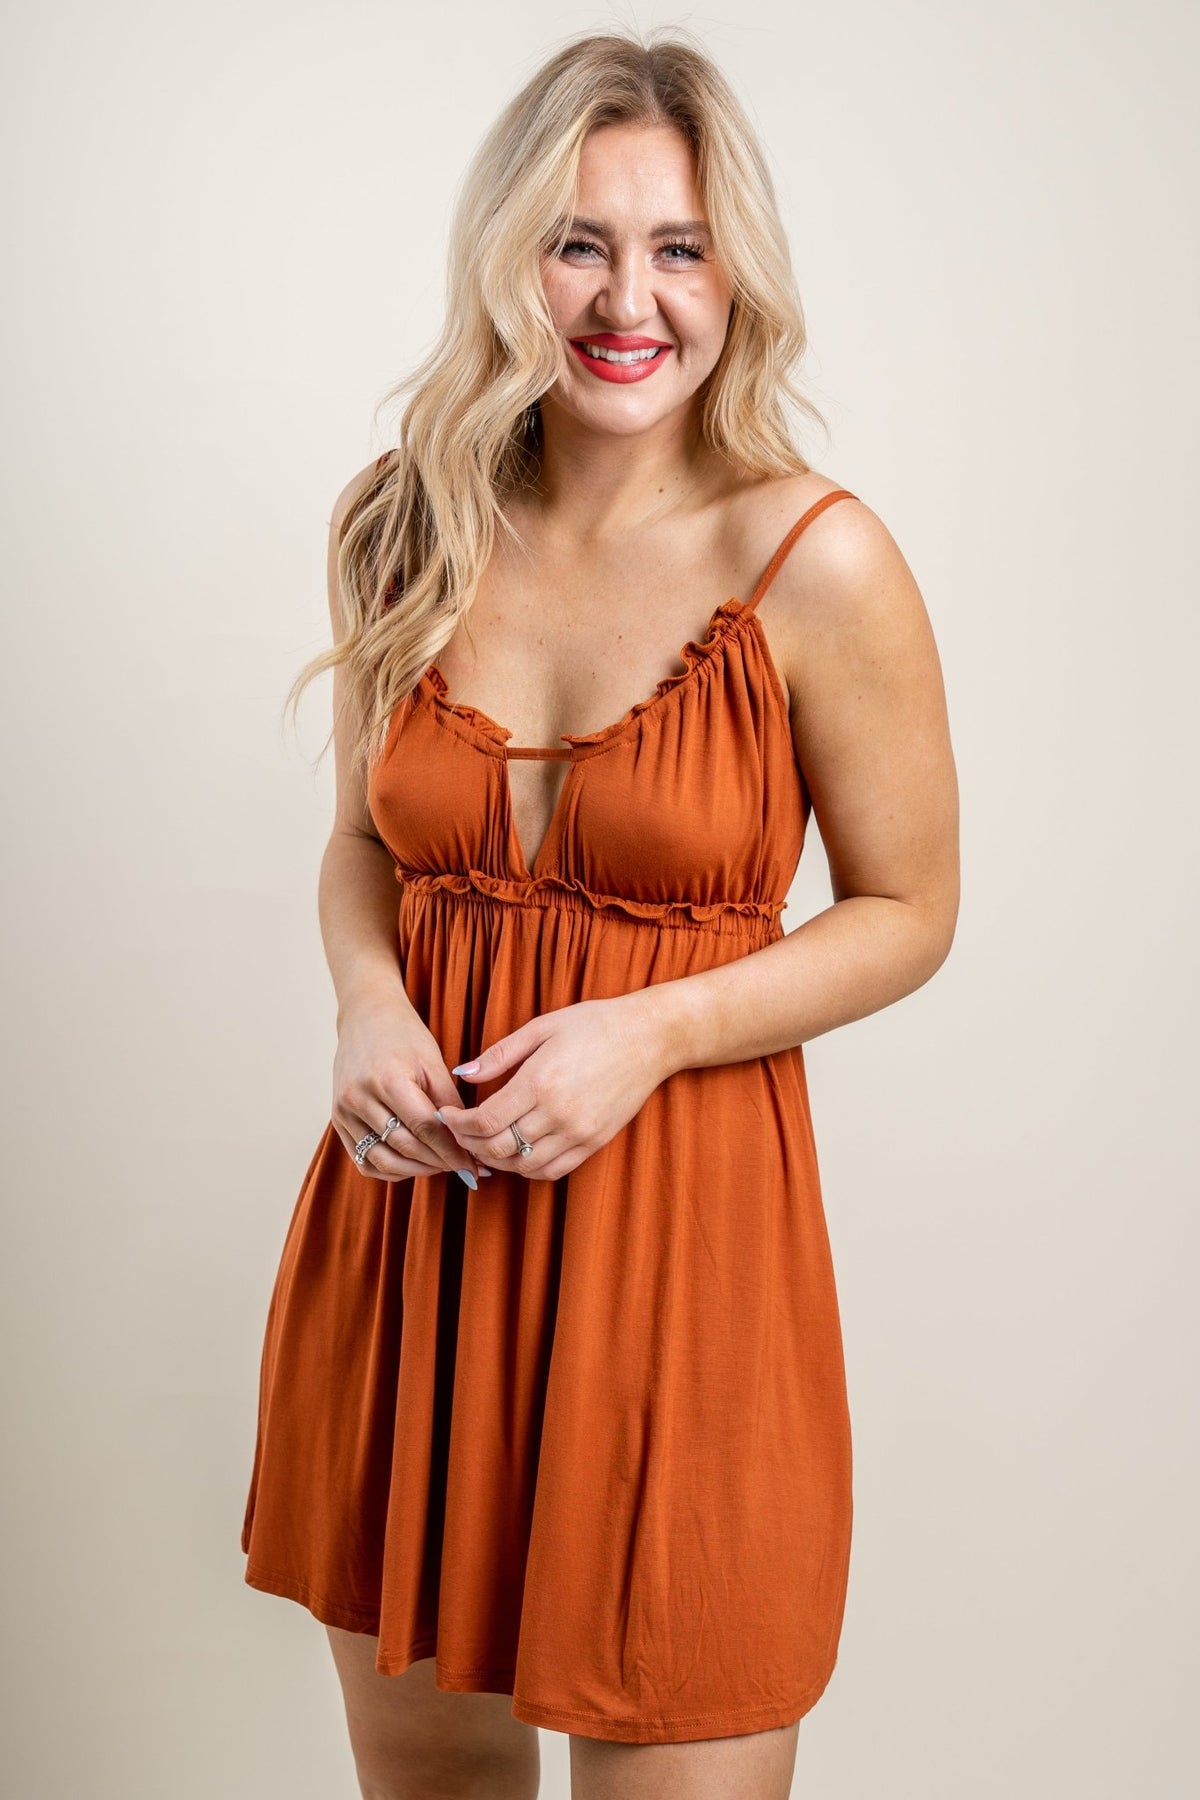 Ruched knit dress rust - Cute Dress - Trendy Dresses at Lush Fashion Lounge Boutique in Oklahoma City